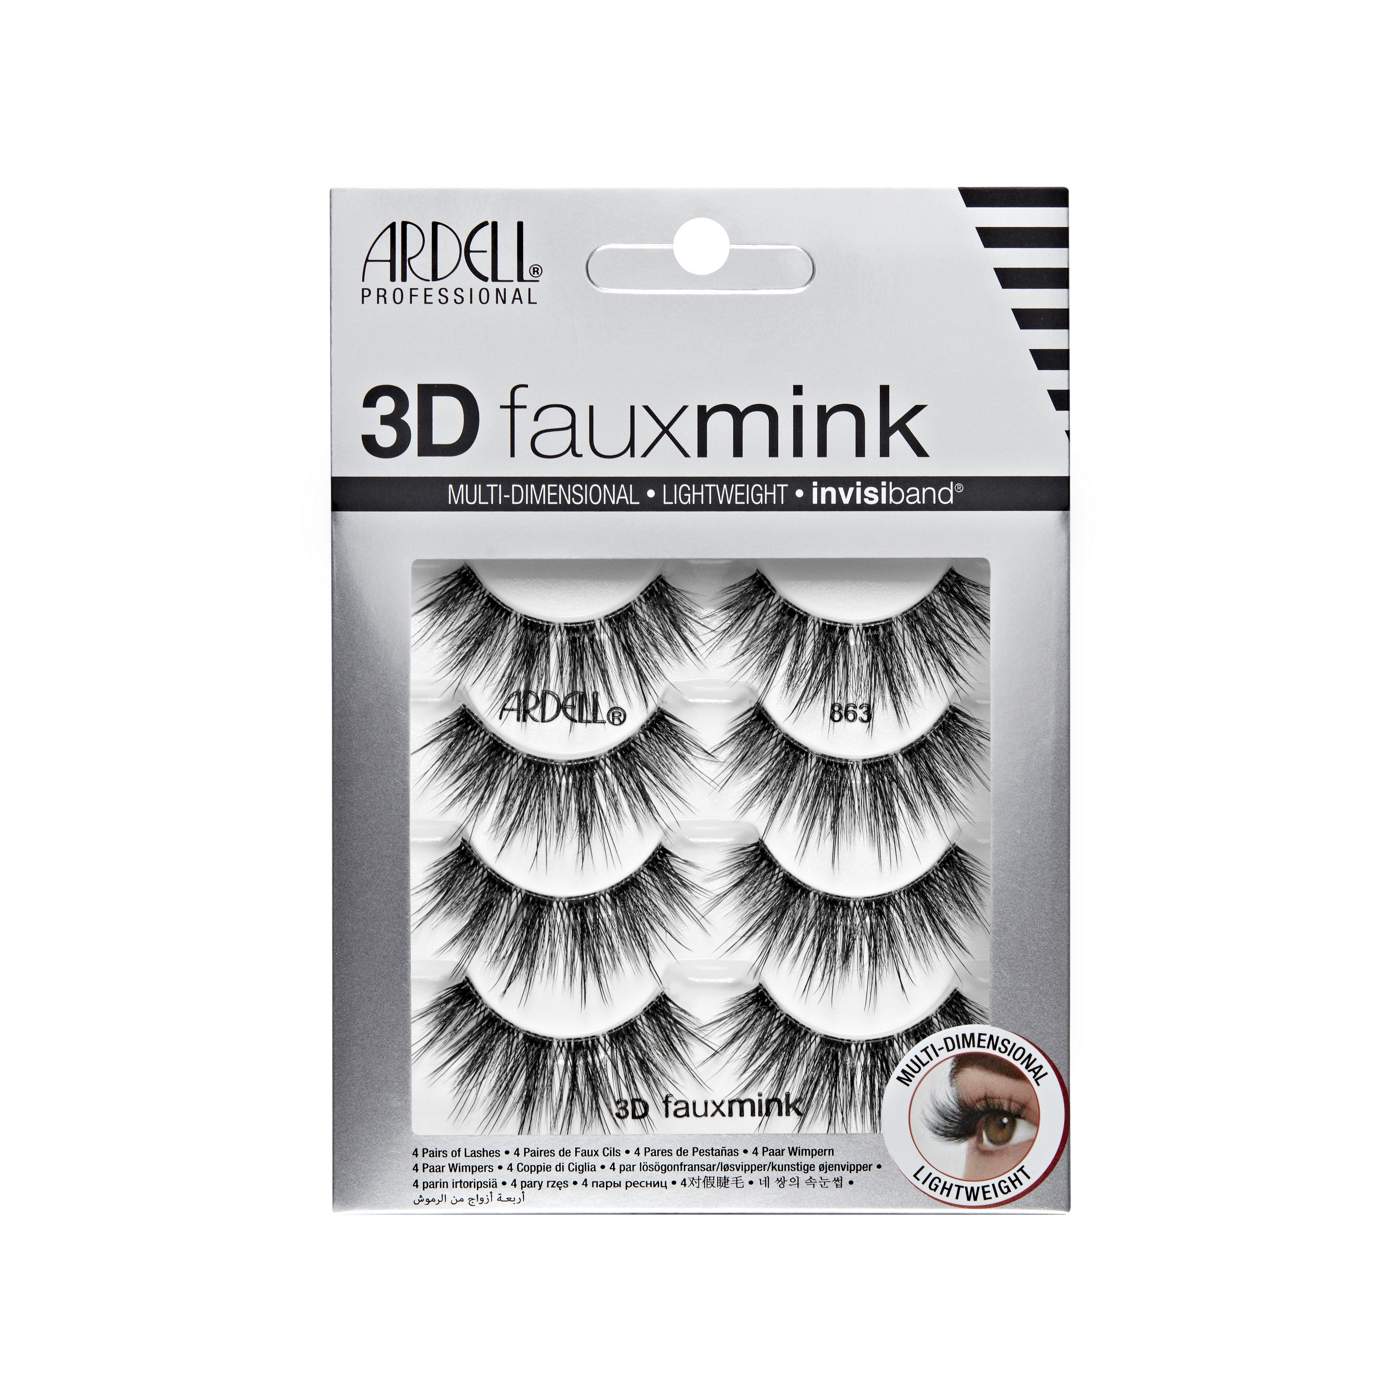 Ardell 3D Faux Mink Lashes - 863; image 1 of 3